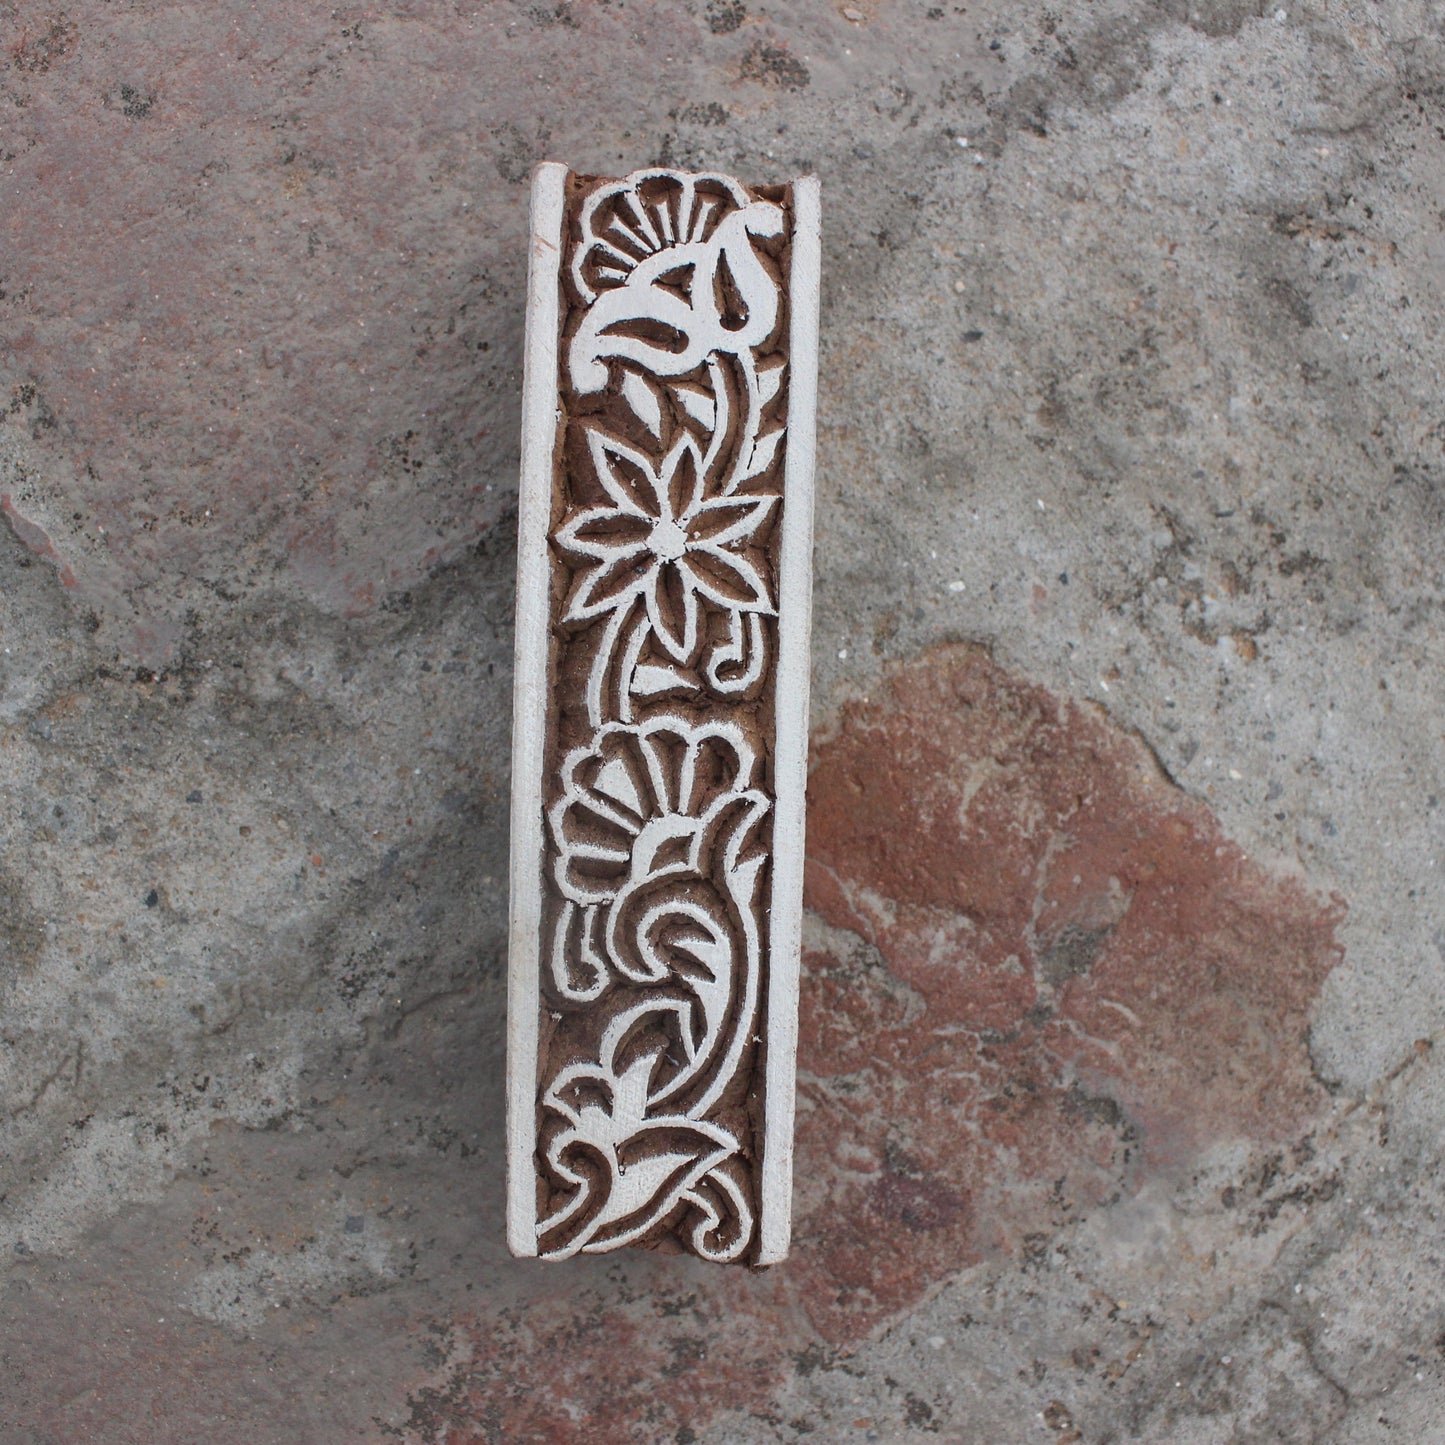 Floral Border Print Stamp Carve Block Fabric Stamp Ethnic Border Stamp Hand Carved Textile Block For Printing Traditional Soap Making Stamp